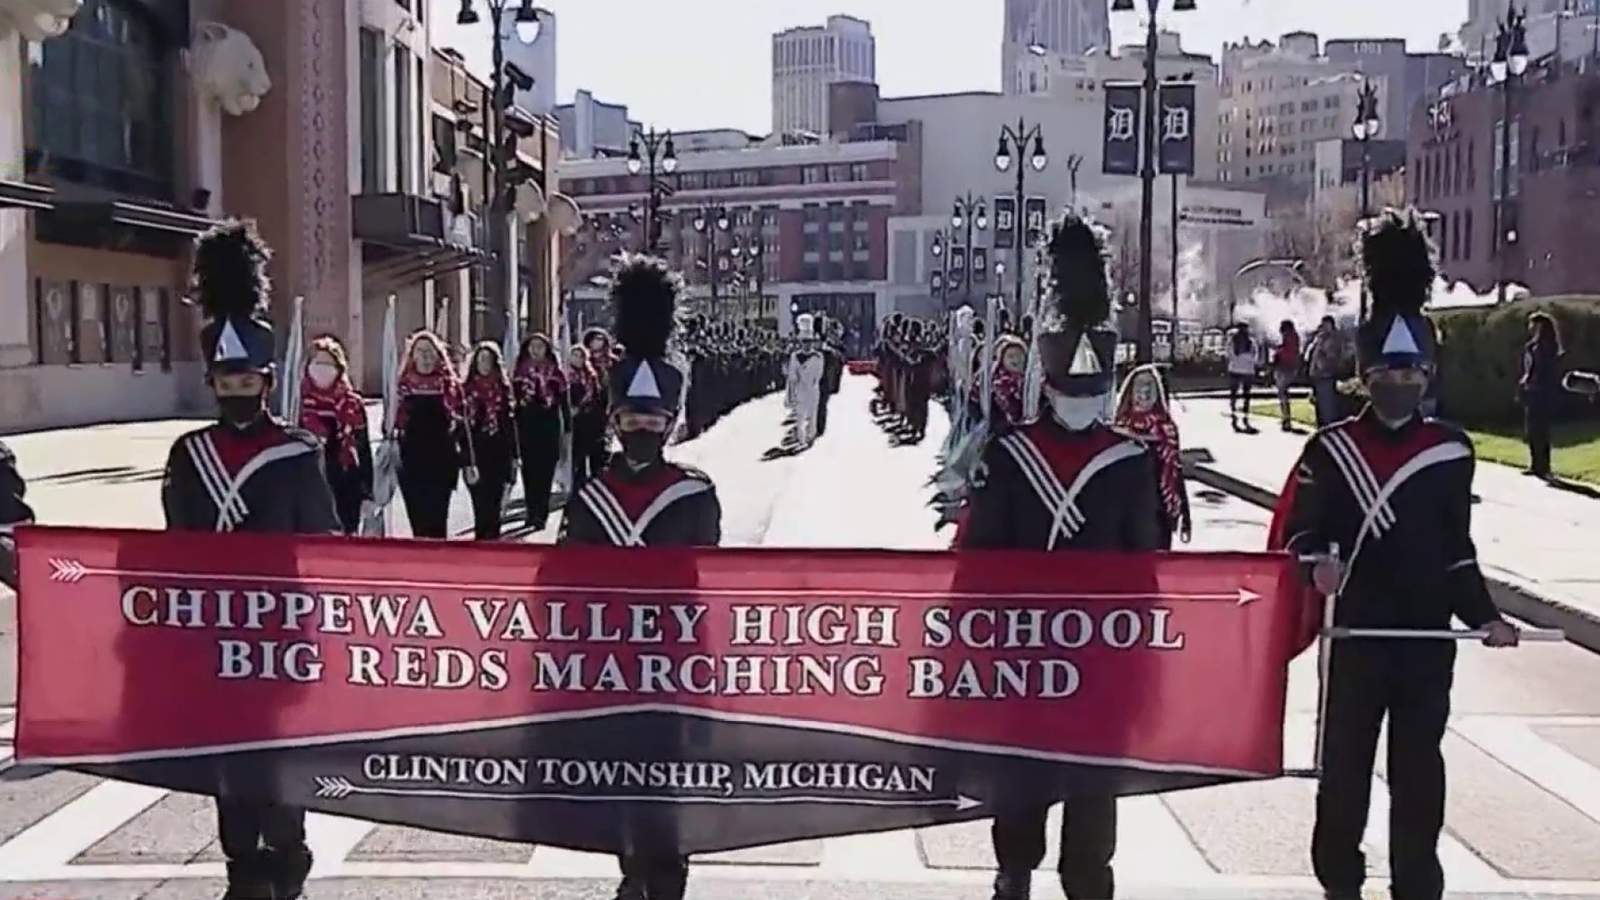 Chippewa Valley High School Big Reds Marching Band performs at 2020 America’s Thanksgiving Parade